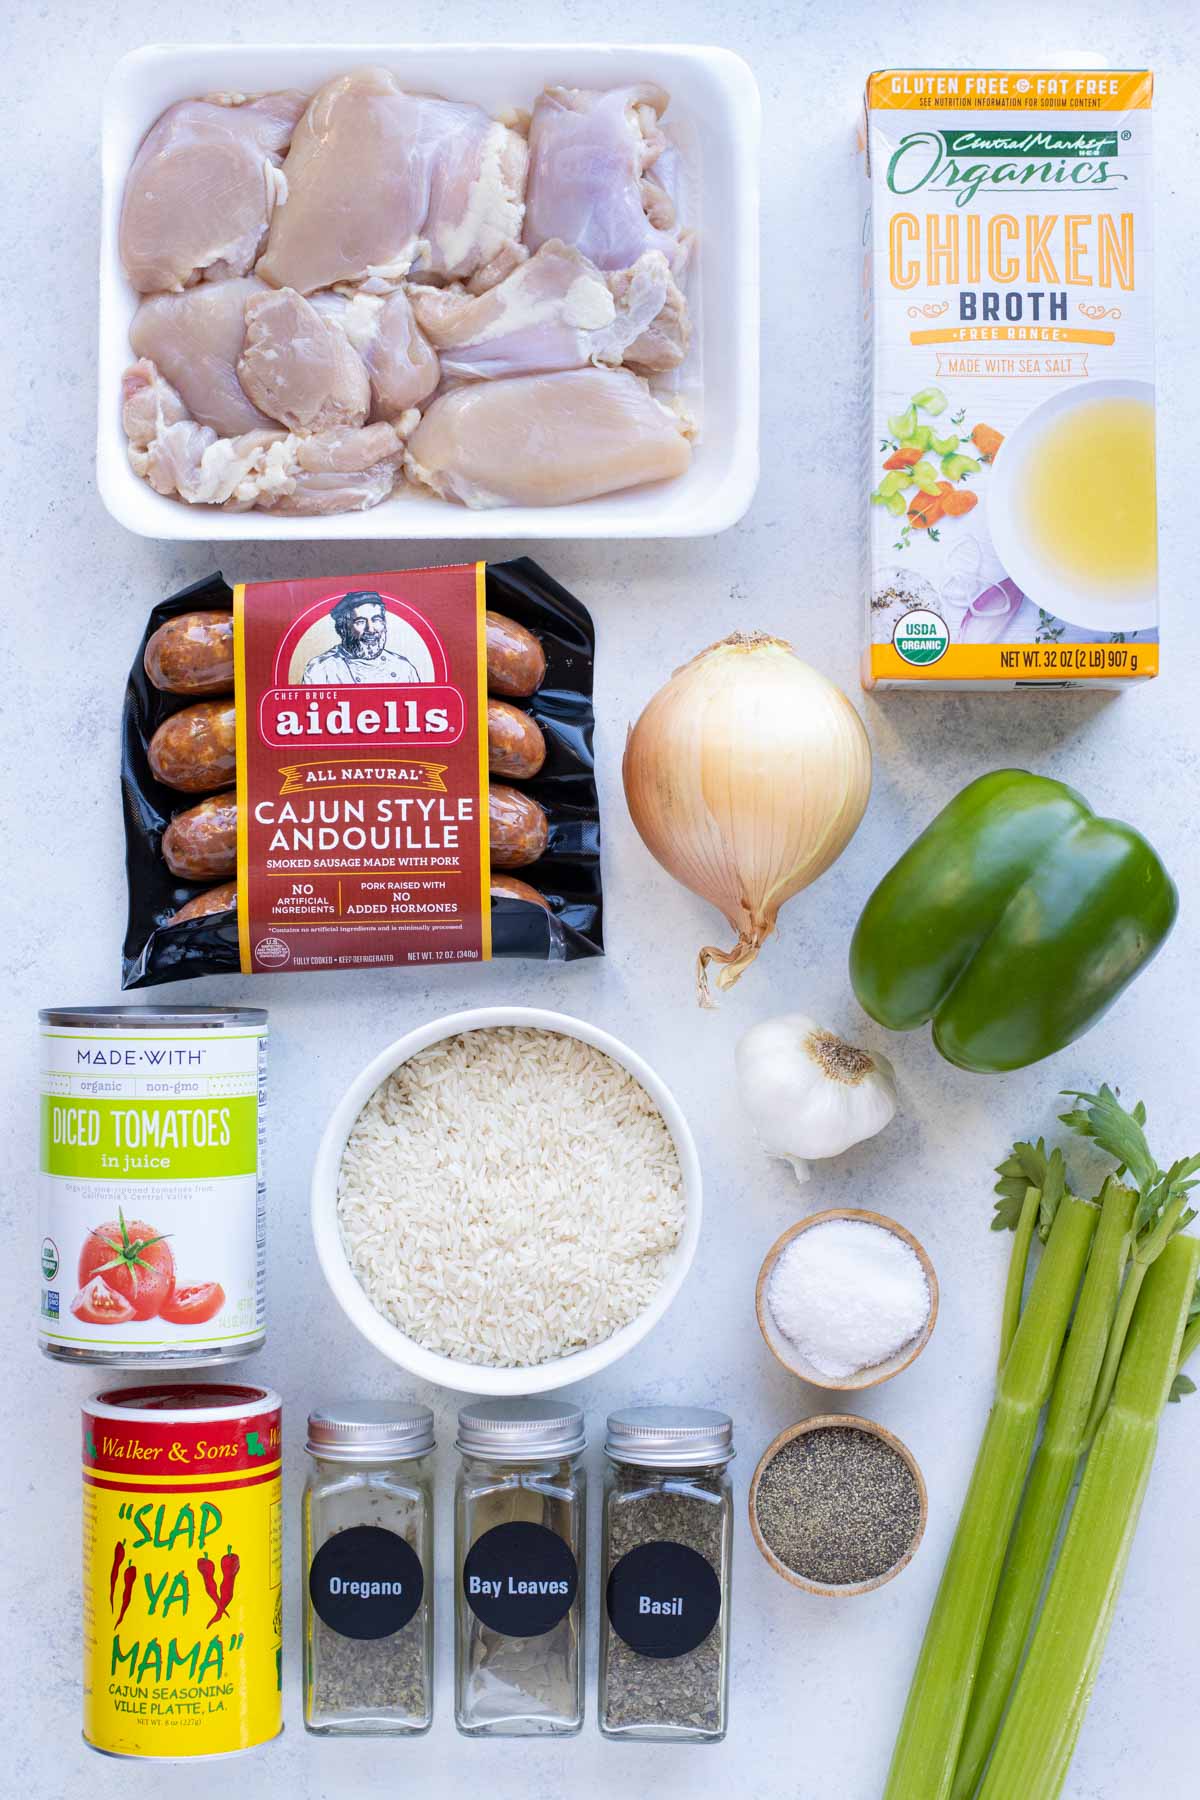 Chicken thighs, sausage, onions, peppers, celery, broth, rice, tomatoes, seasonings are the ingredients in this recipe.